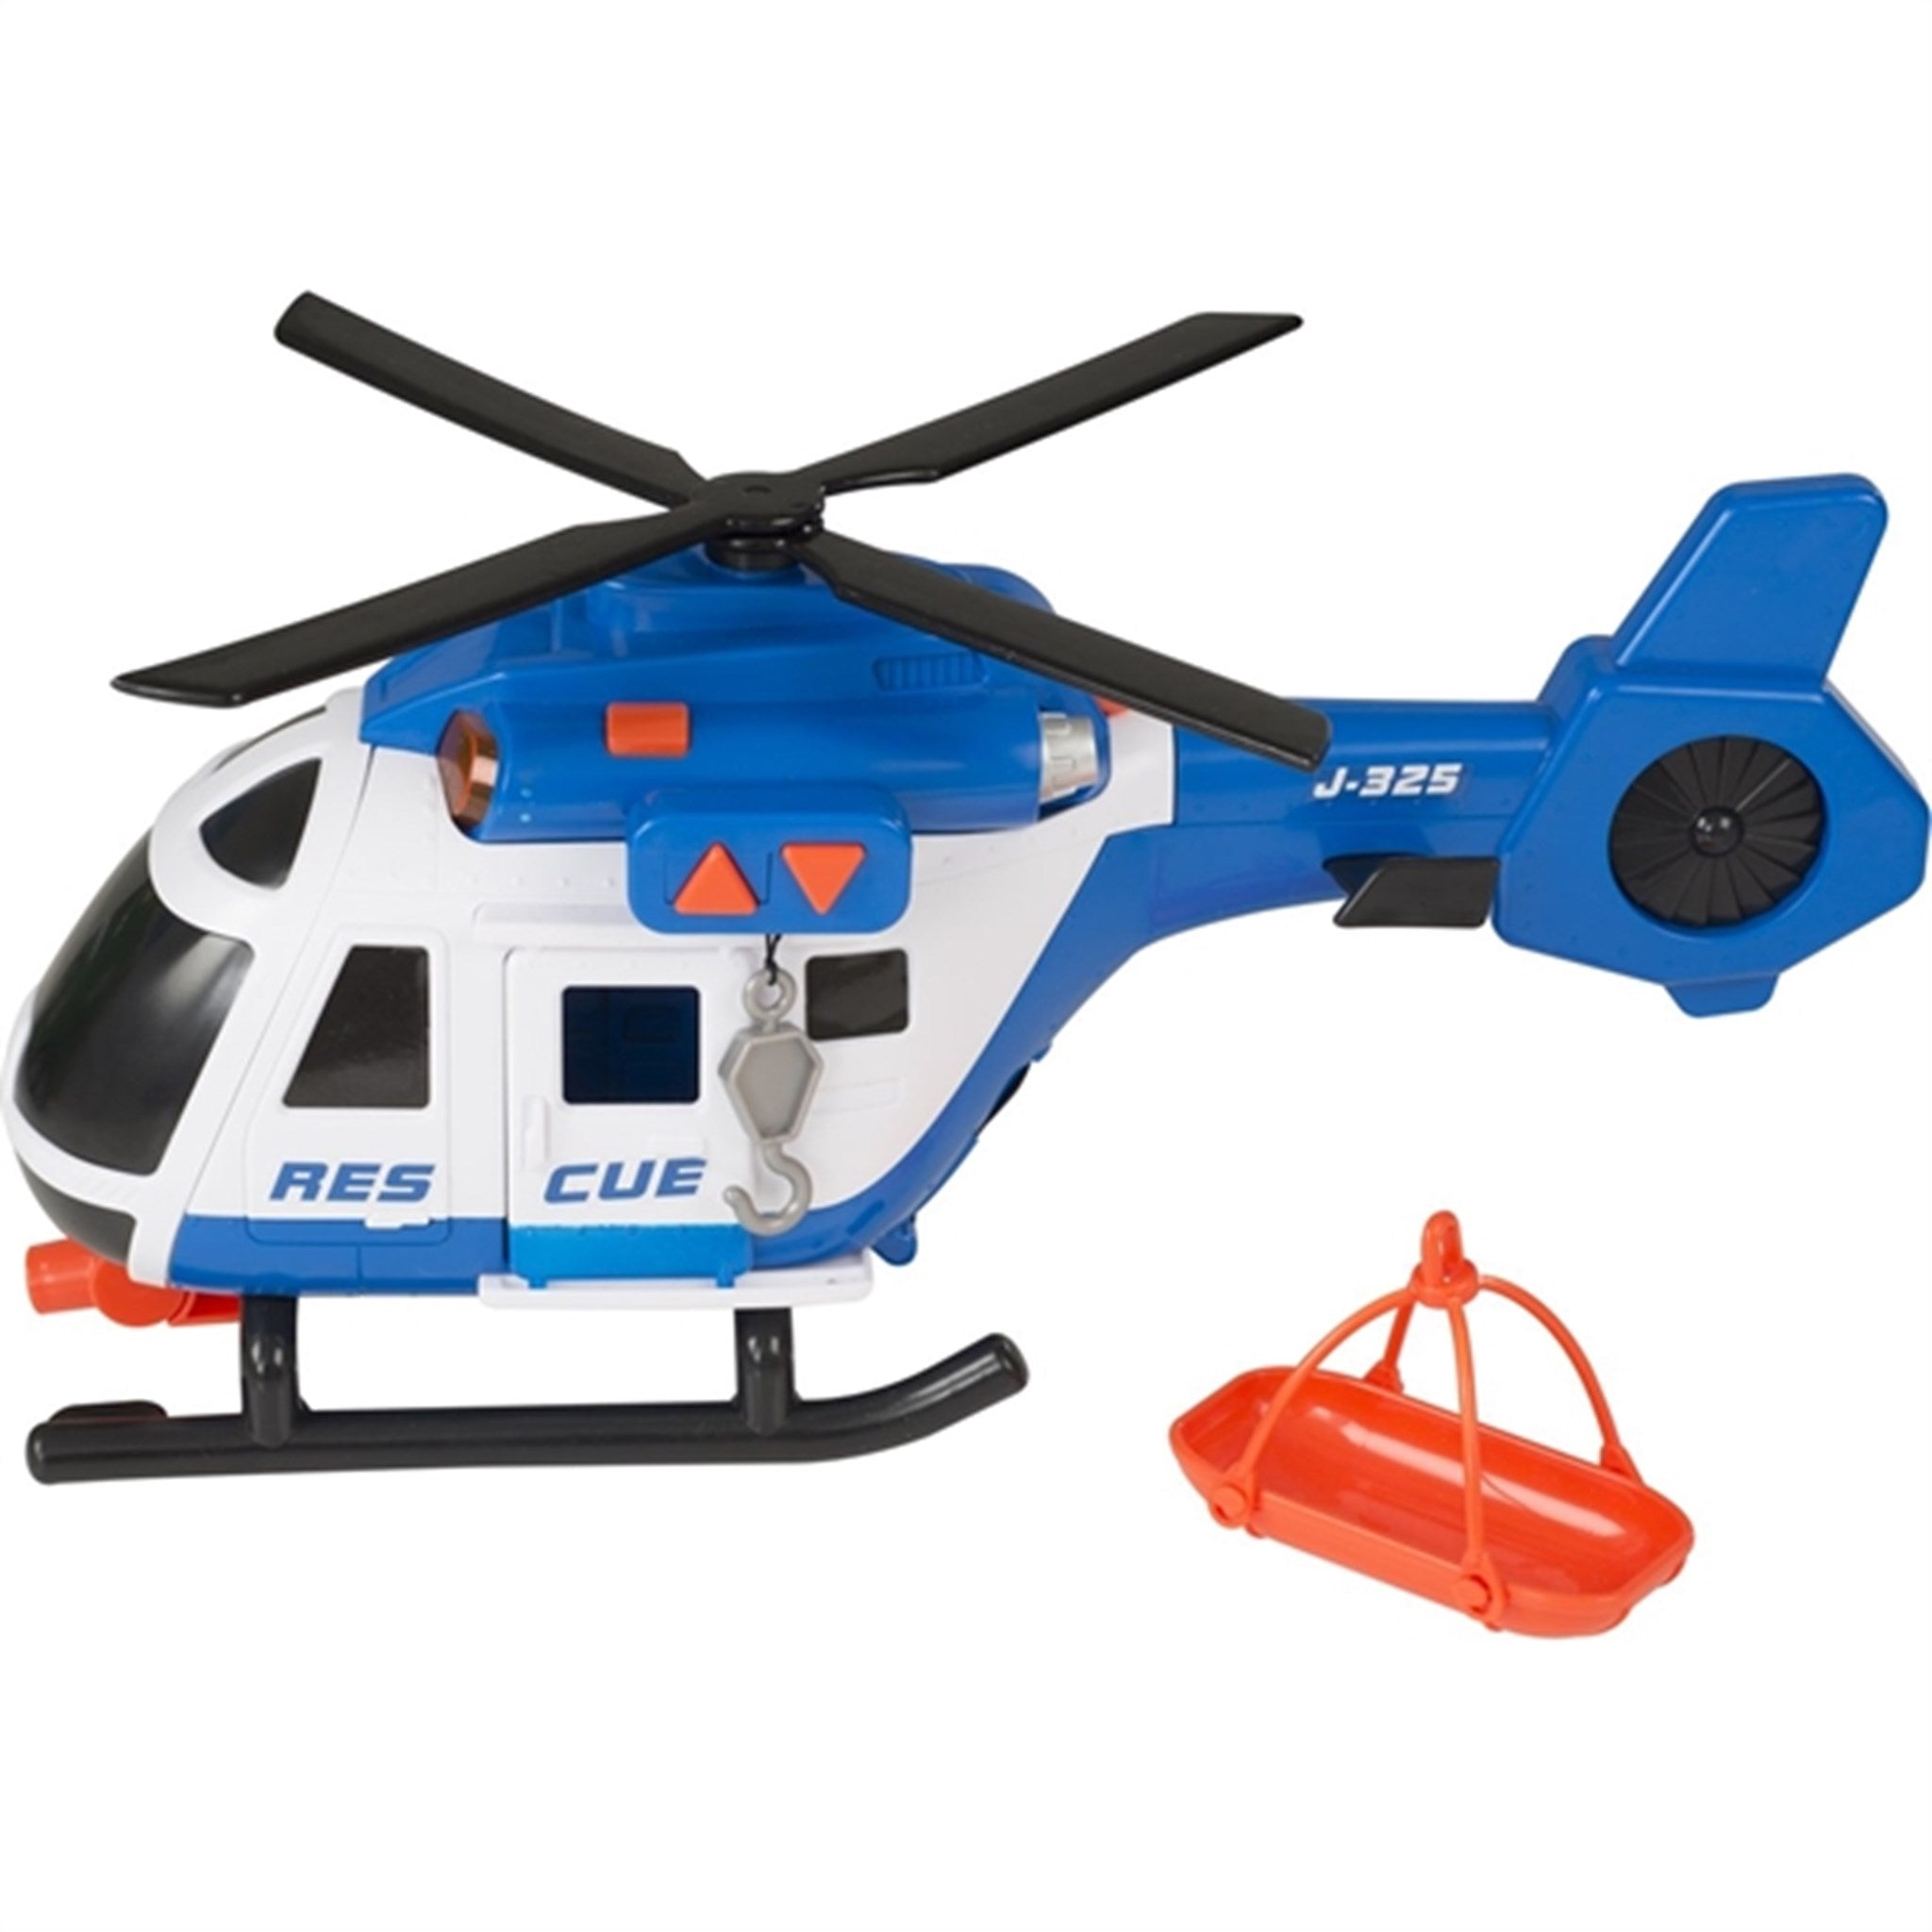 Teamsterz Large L&S Helicopter